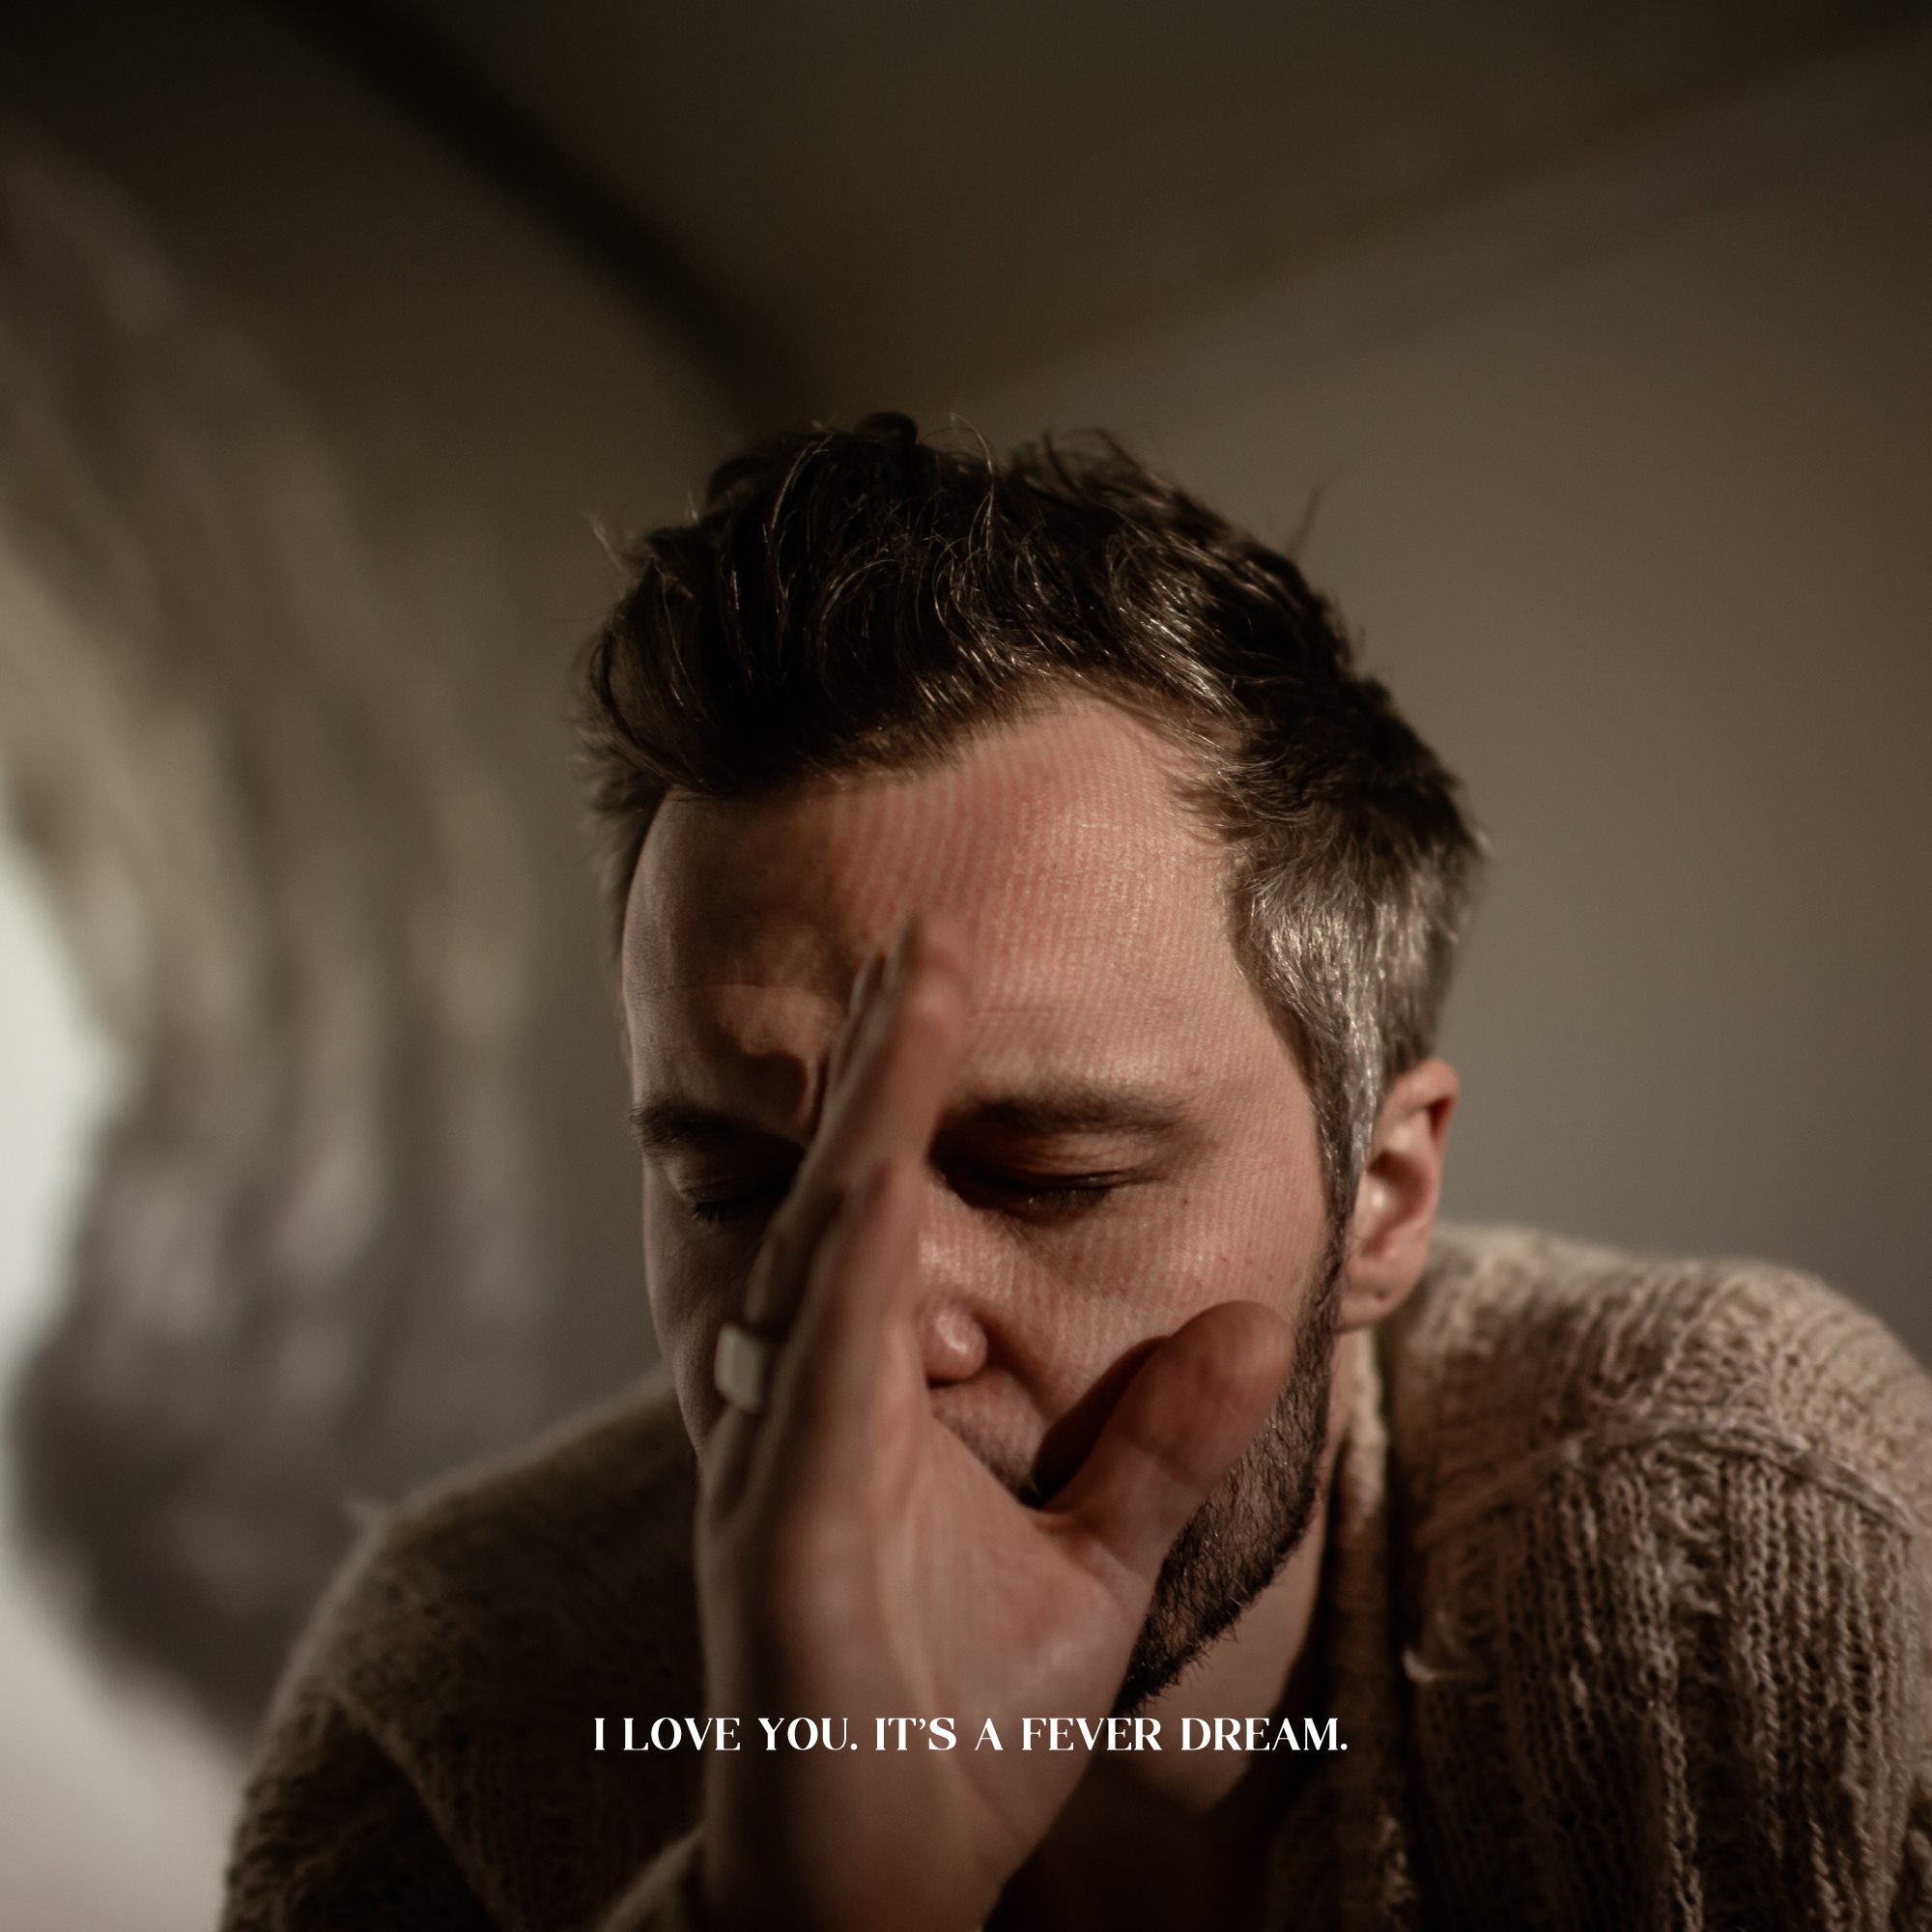 The Tallest Man on Earth is streaming his new new album, Love You. It's A Fever Dream